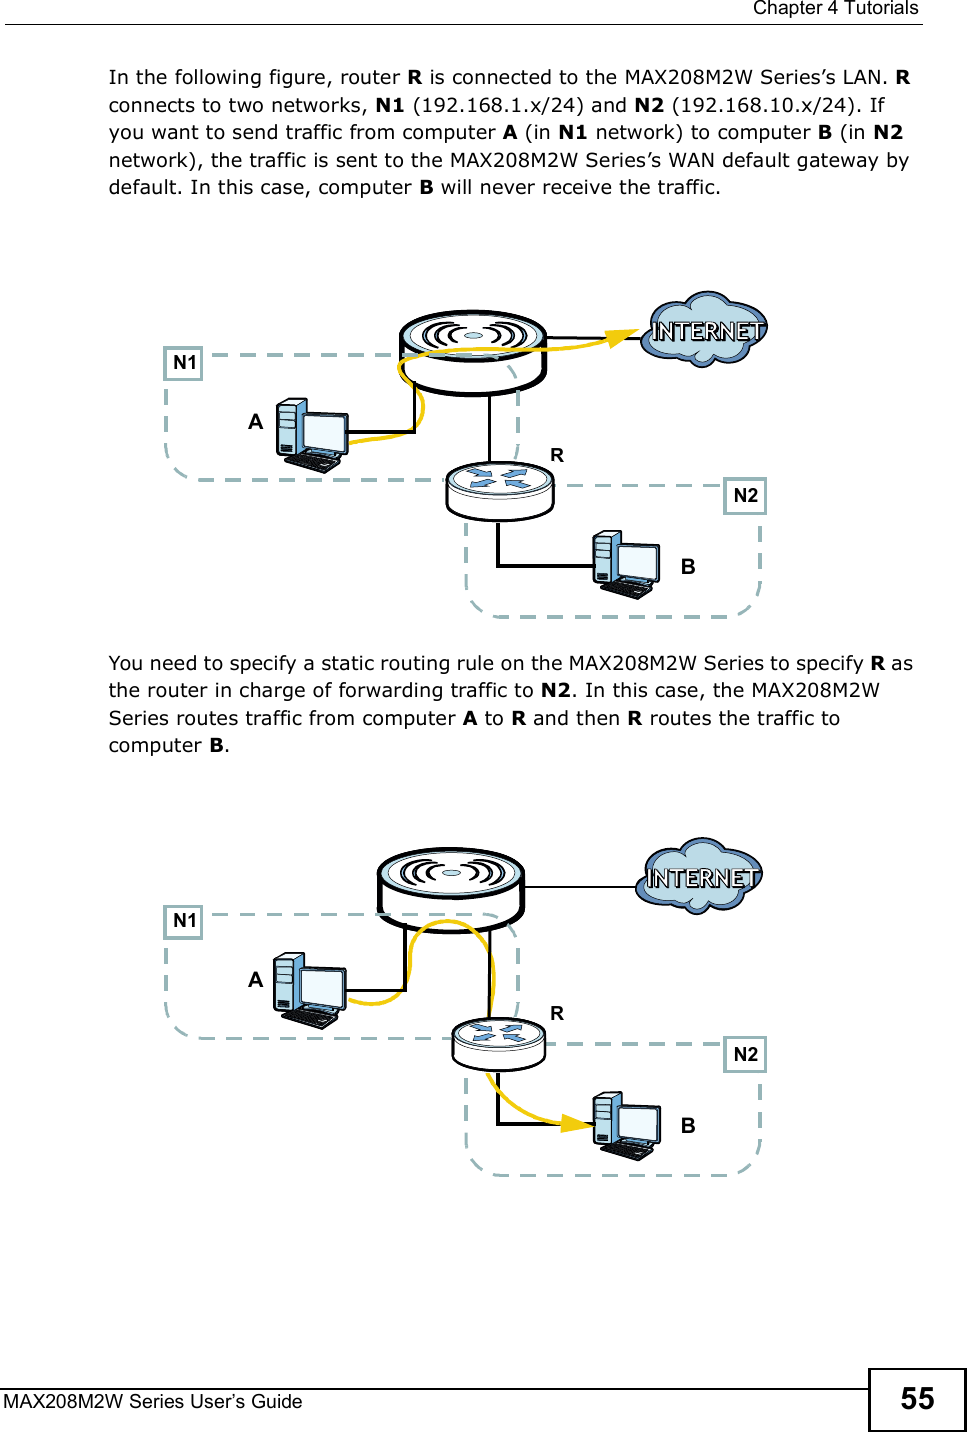  Chapter 4TutorialsMAX208M2W Series User s Guide 55In the following figure, router R is connected to the MAX208M2W Series s LAN. R connects to two networks, N1 (192.168.1.x/24) and N2 (192.168.10.x/24). If you want to send traffic from computer A (in N1 network) to computer B (in N2 network), the traffic is sent to the MAX208M2W Series s WAN default gateway by default. In this case, computer B will never receive the traffic.You need to specify a static routing rule on the MAX208M2W Series to specify R as the router in charge of forwarding traffic to N2. In this case, the MAX208M2W Series routes traffic from computer A to R and then R routes the traffic to computer B.N2BARN1N2BN1AR